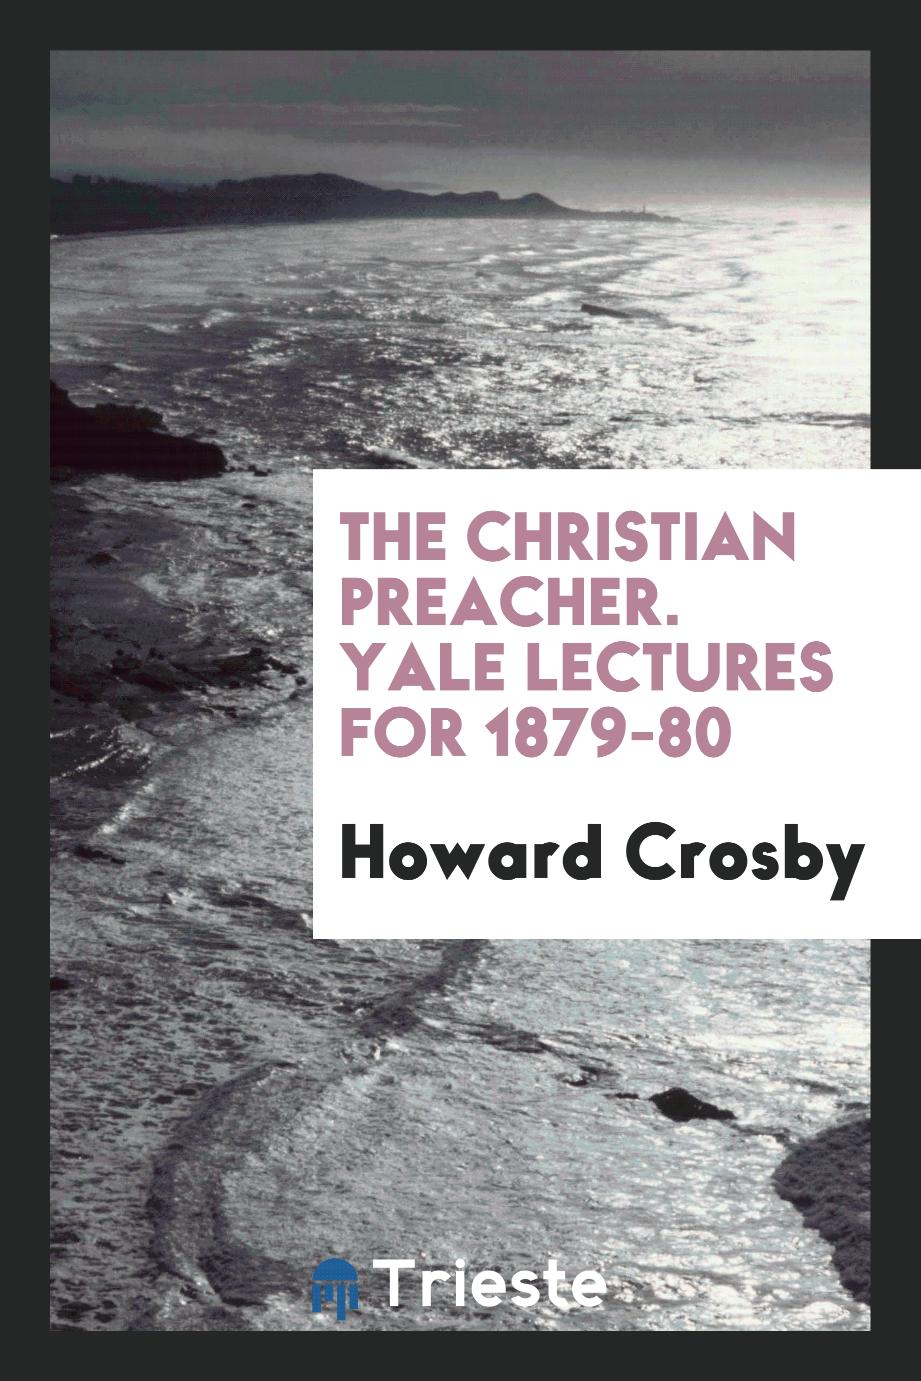 The Christian Preacher. Yale Lectures for 1879-80